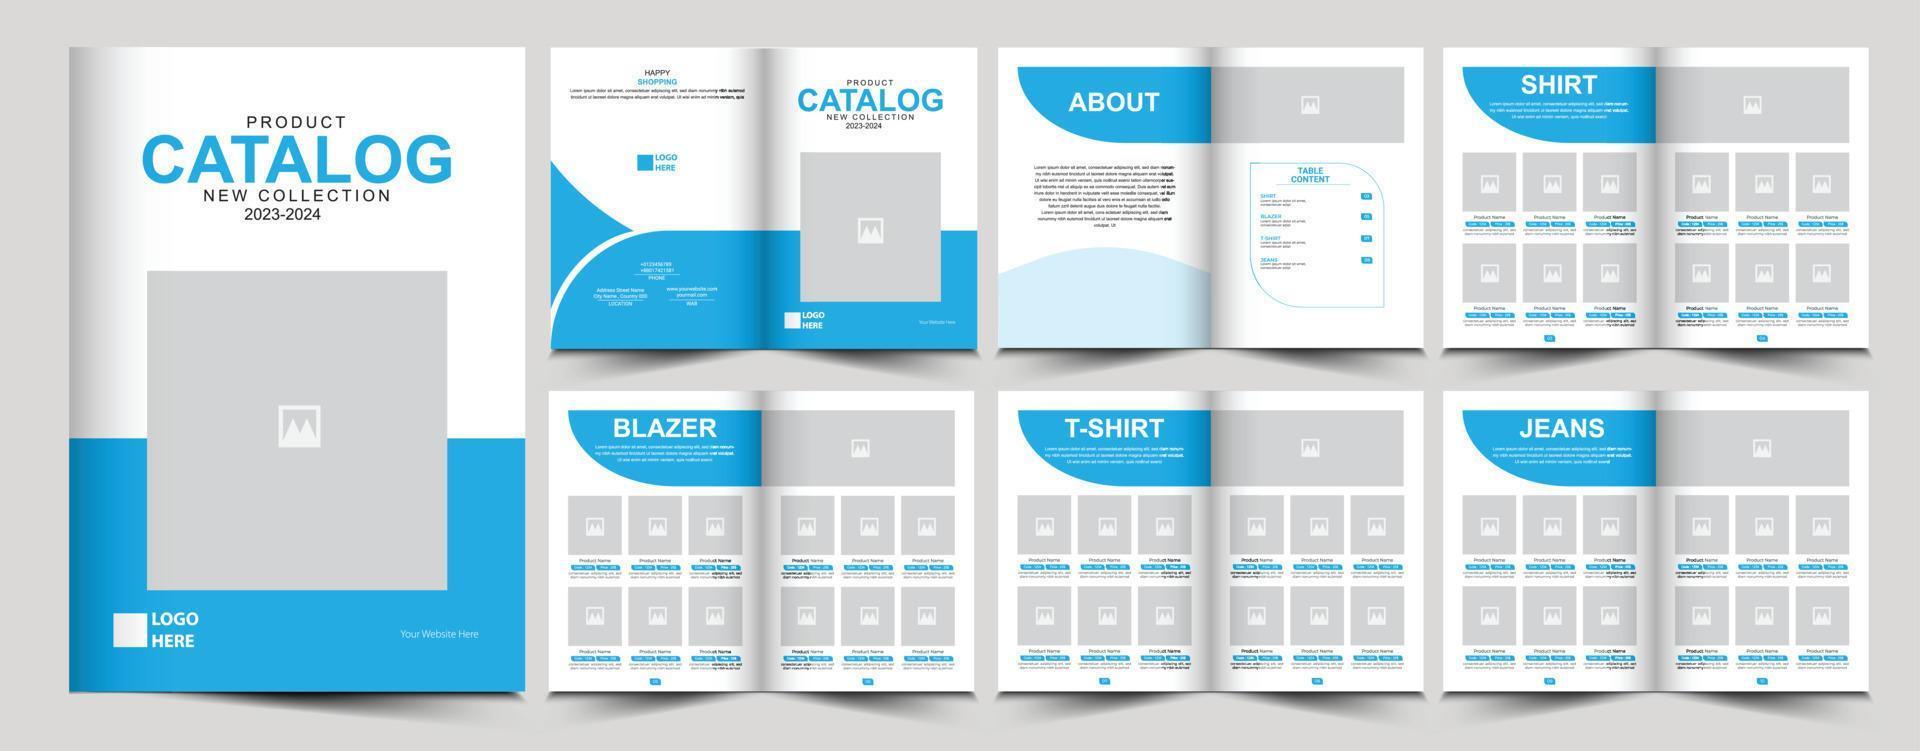 Vector catalog or catalogue or product catalog template